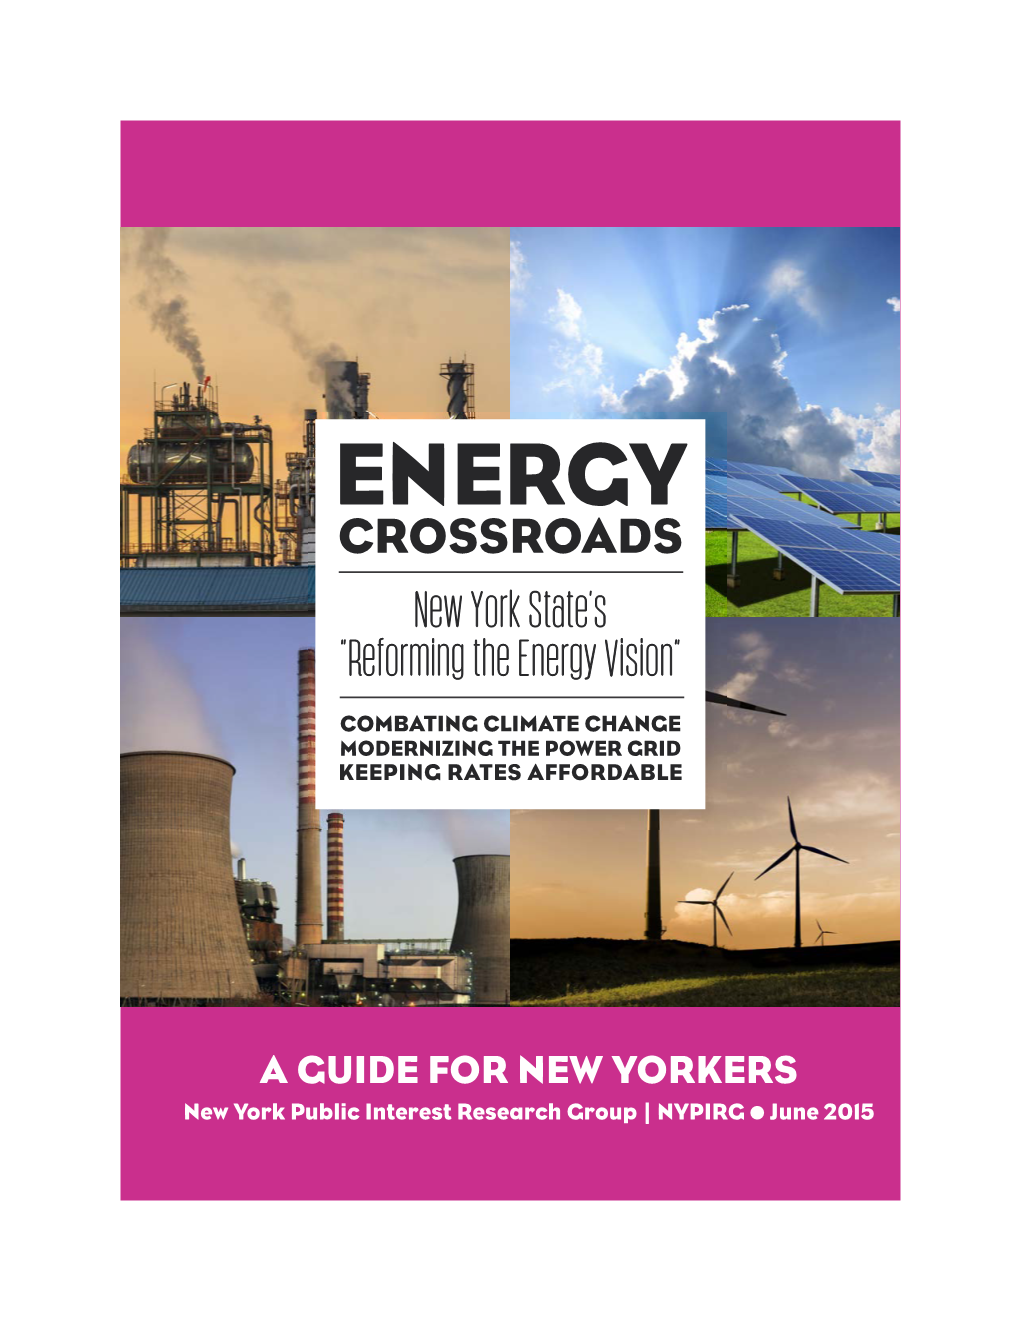 ENERGY CROSSROADS New York State’S “Reforming the Energy Vision”